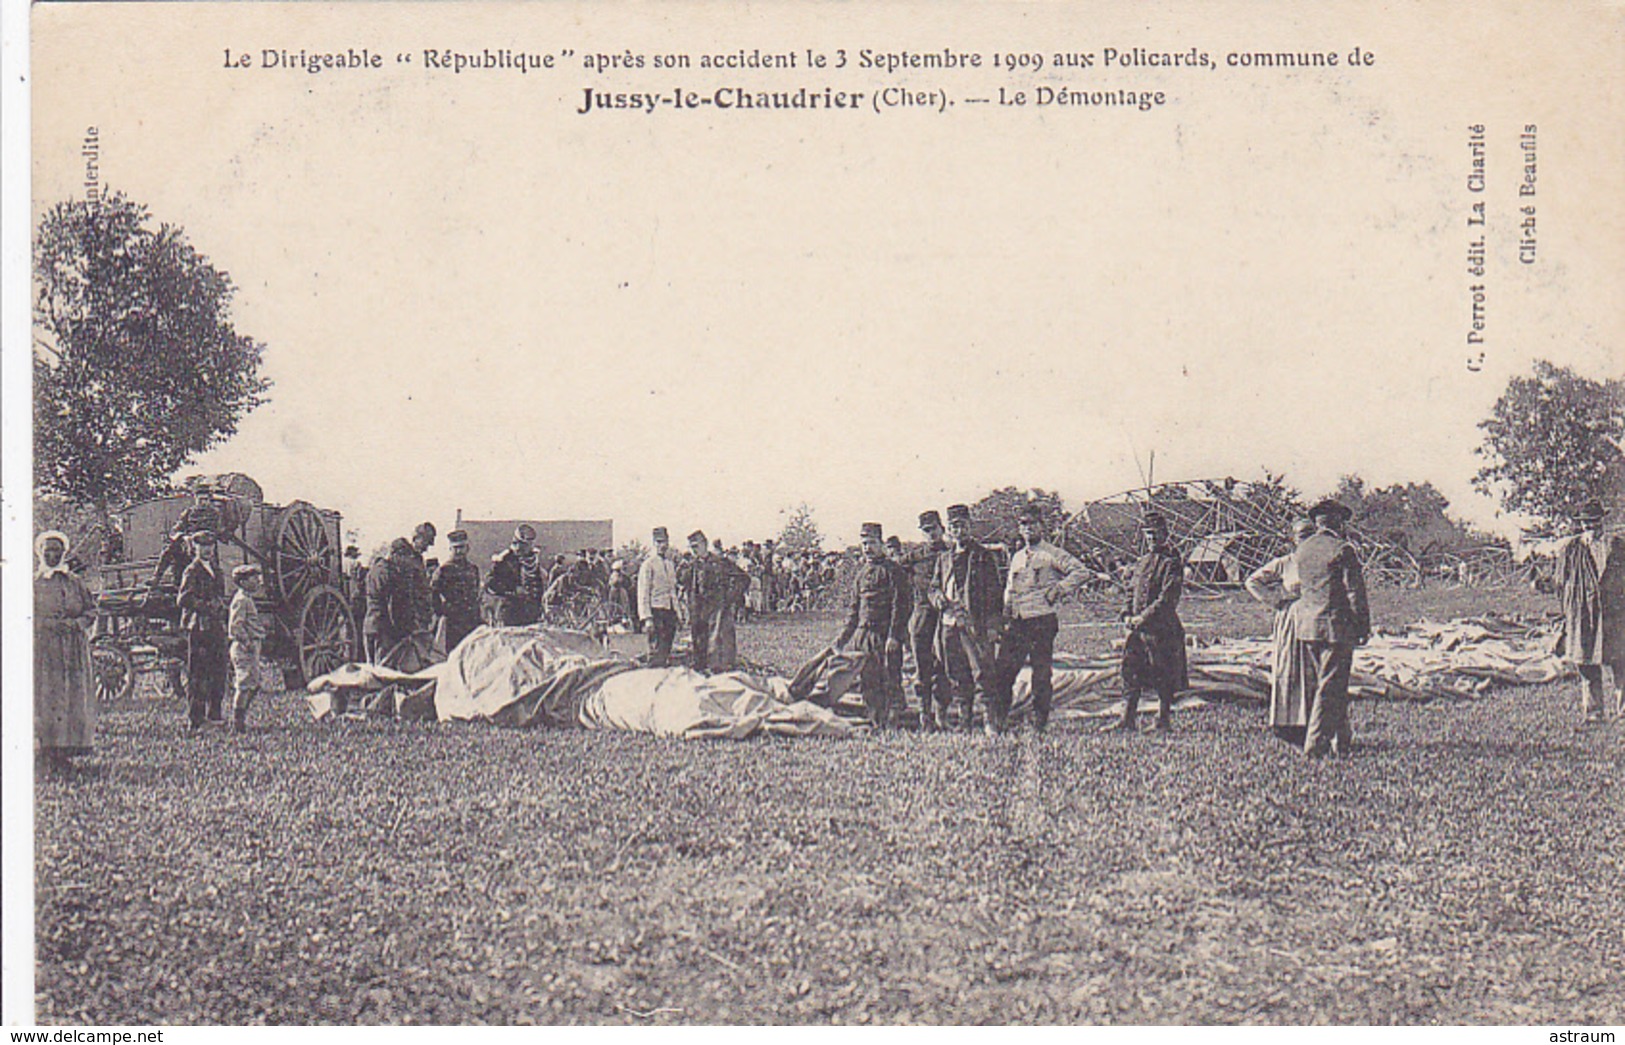 Cpa-aviation-18-dirigeable "republique"-accident-1909 A Jussy Le Chaudrier Aux Policards-edi Perrot / Cliché Beaufils - Airships